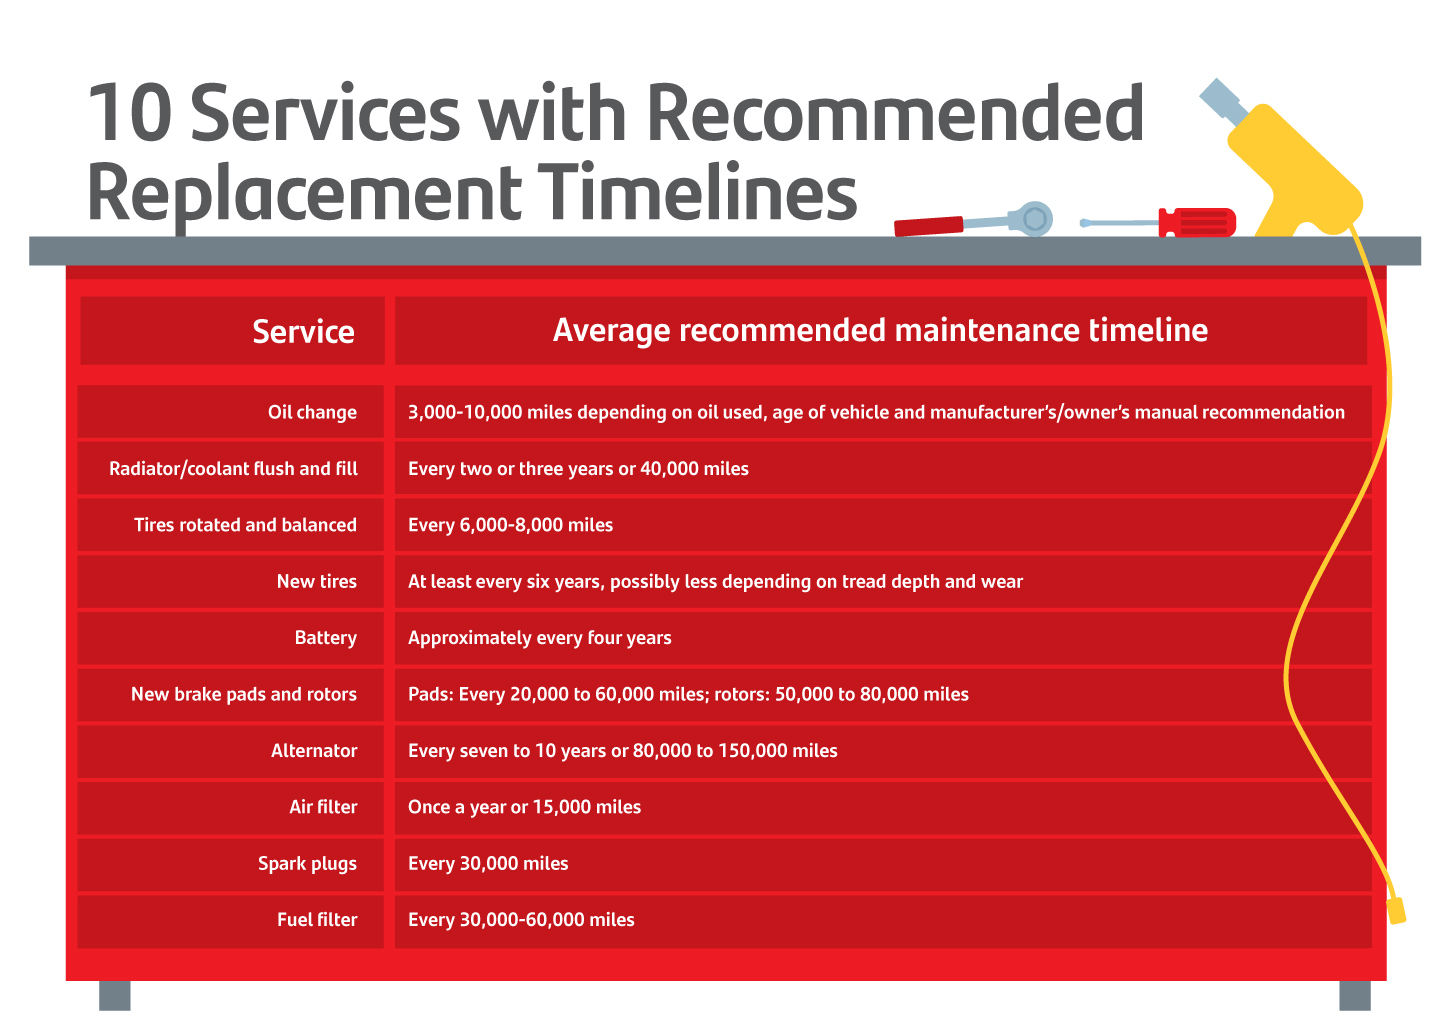 Services Recommended replacement Timelines